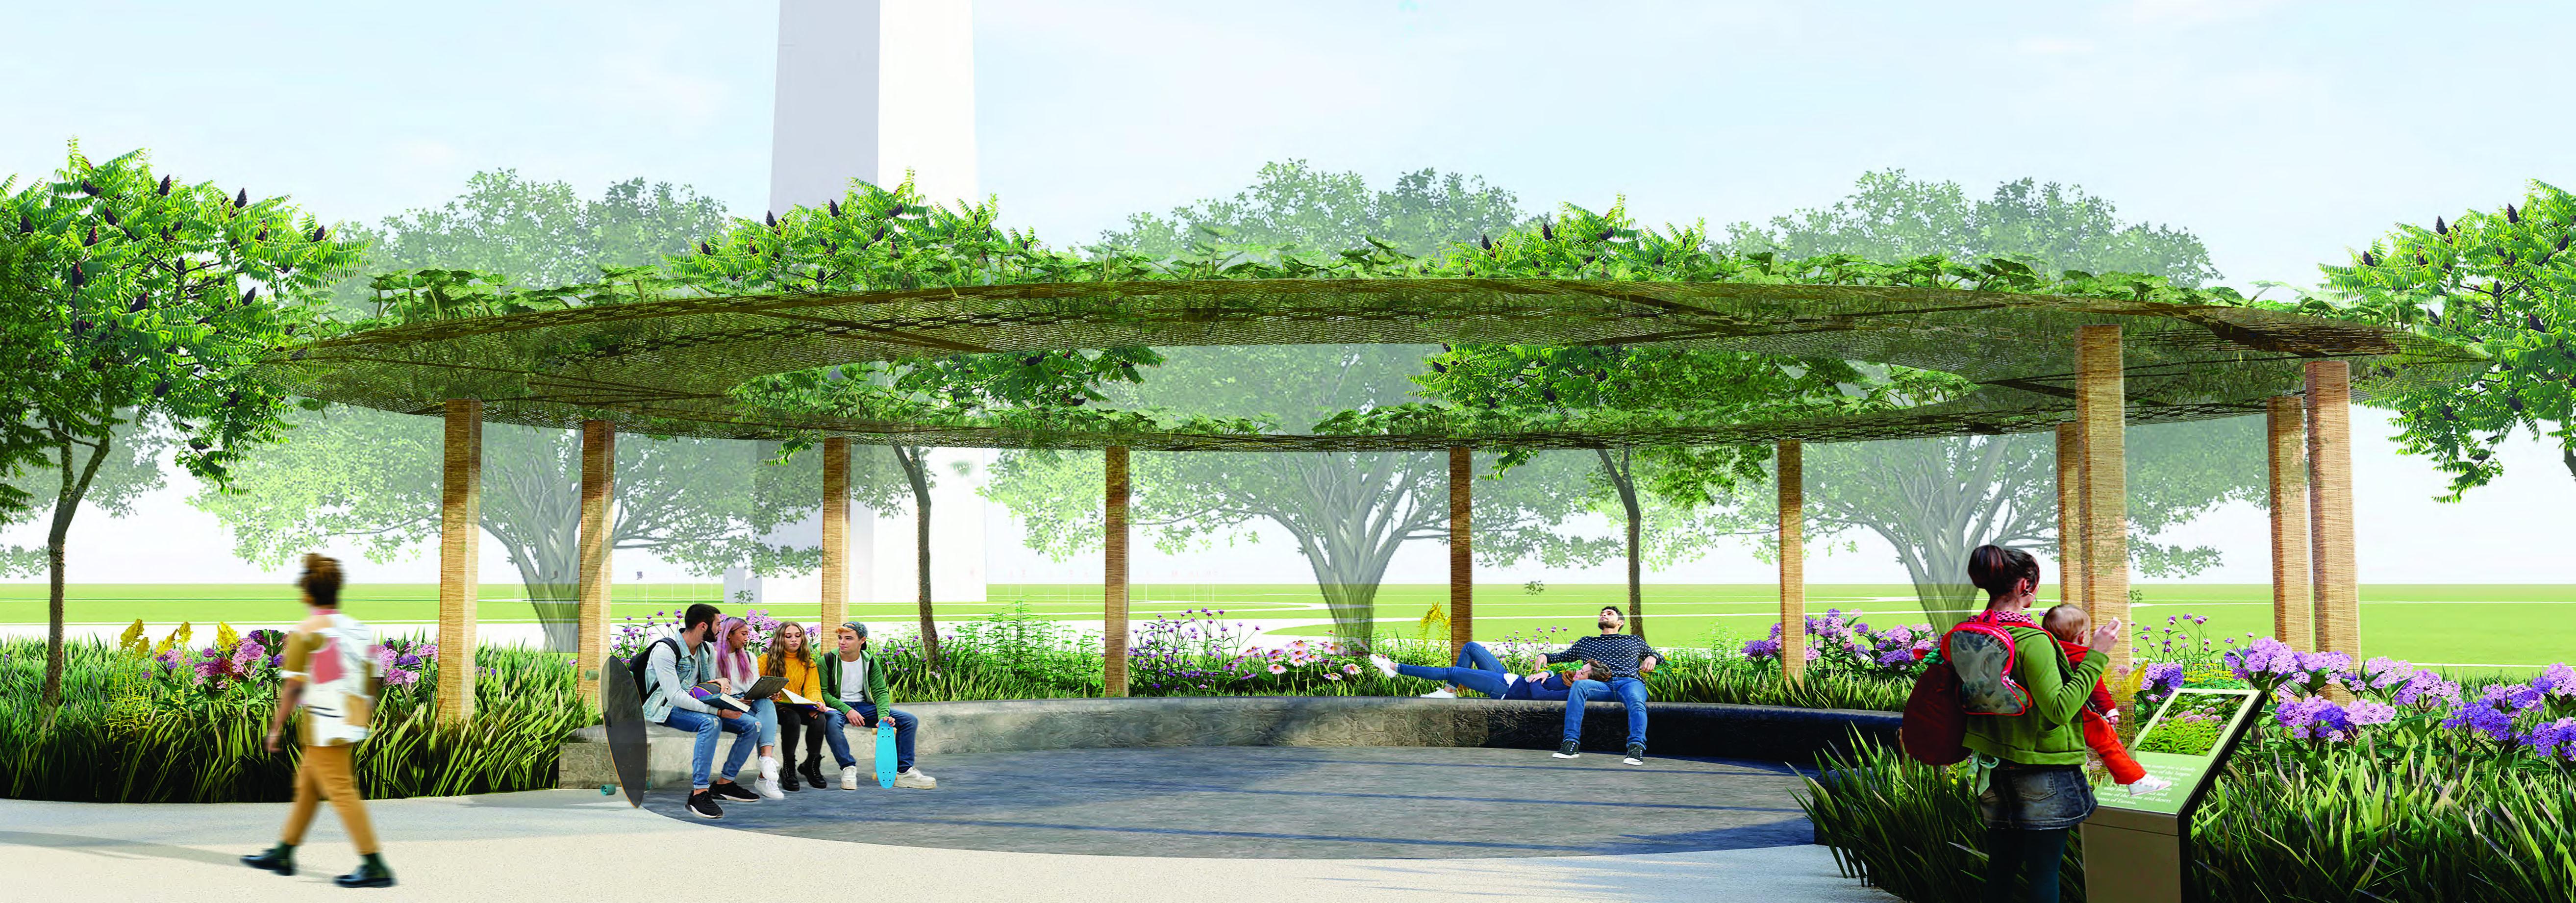 A shadded arbor with seating where people gather beneath the trees.